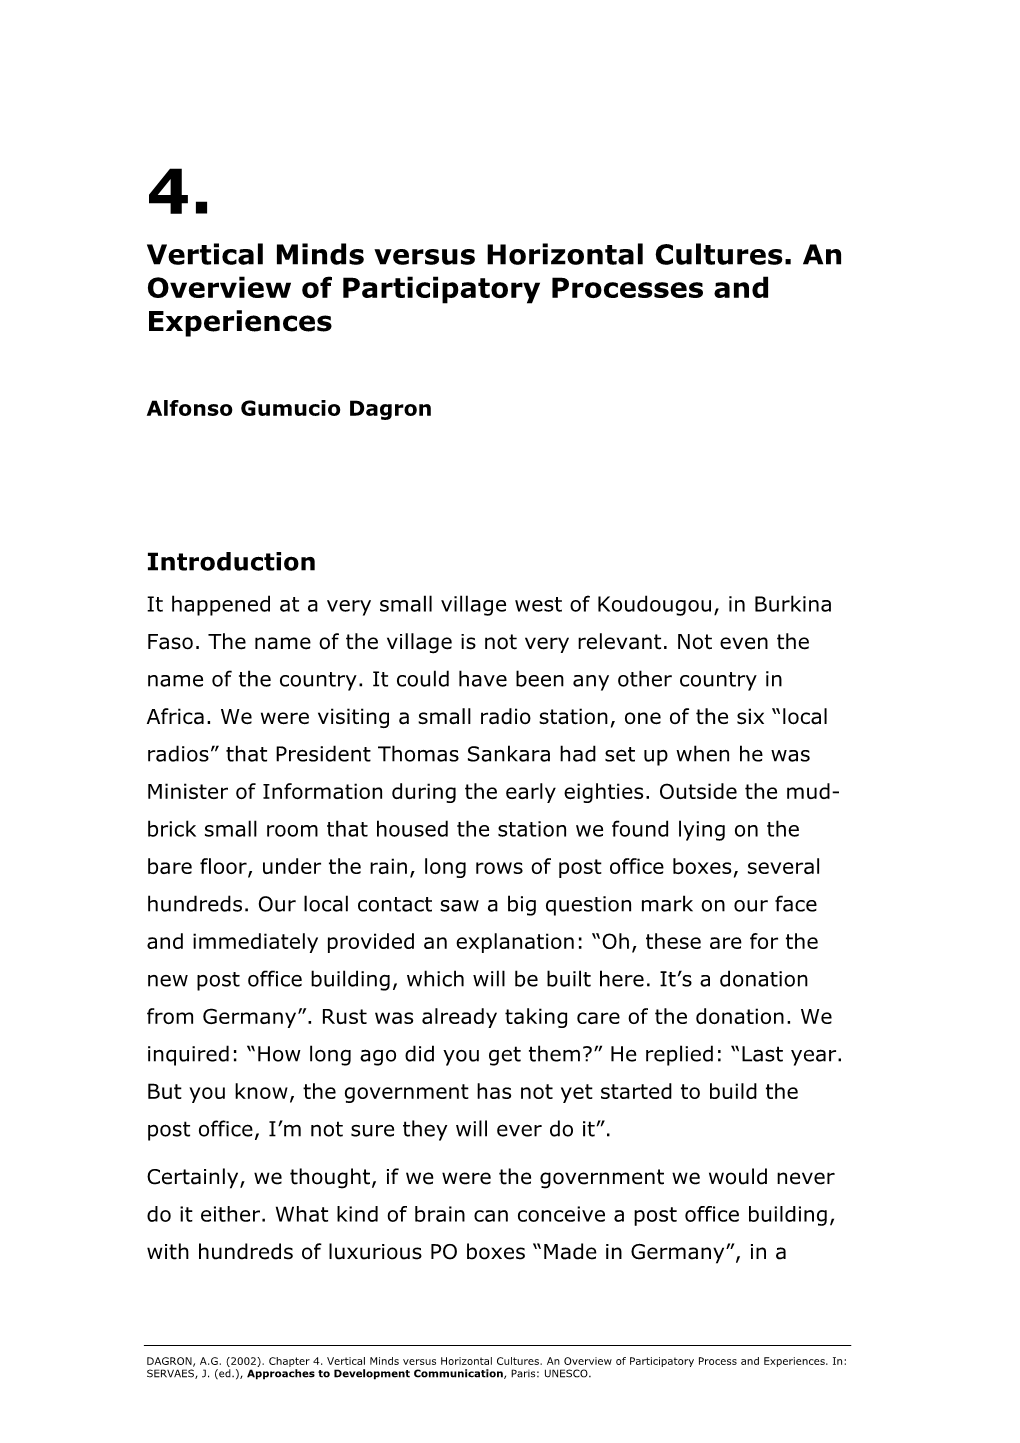 Vertical Minds Versus Horizontal Cultures. an Overview of Participatory Processes and Experiences